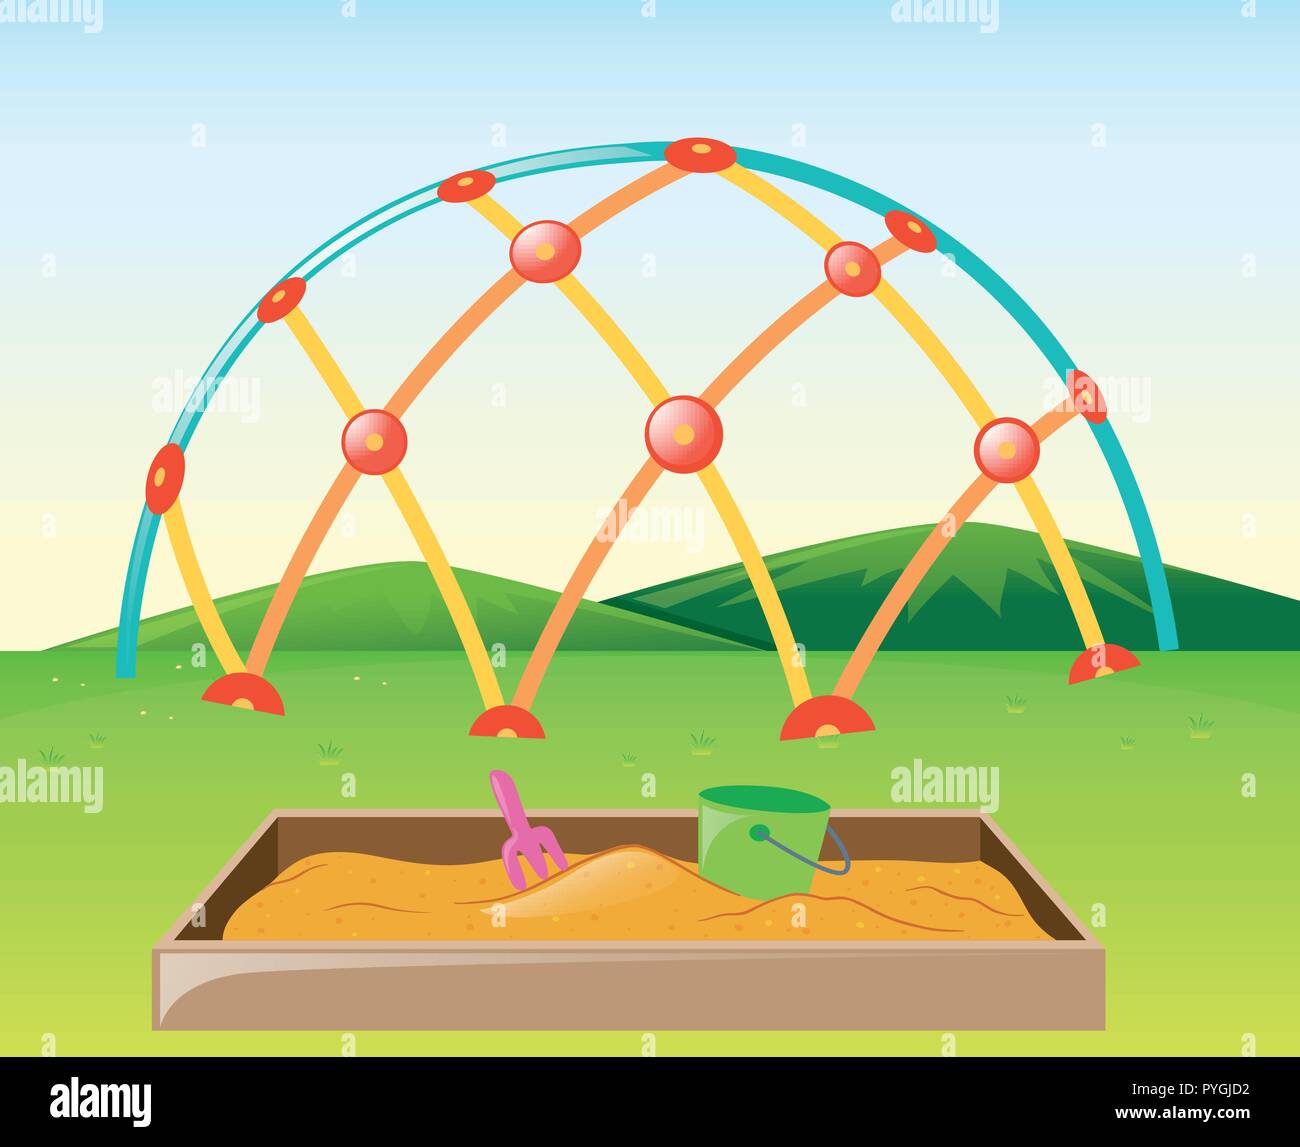 Climbing dome and sandpit in the park illustration Stock Vector